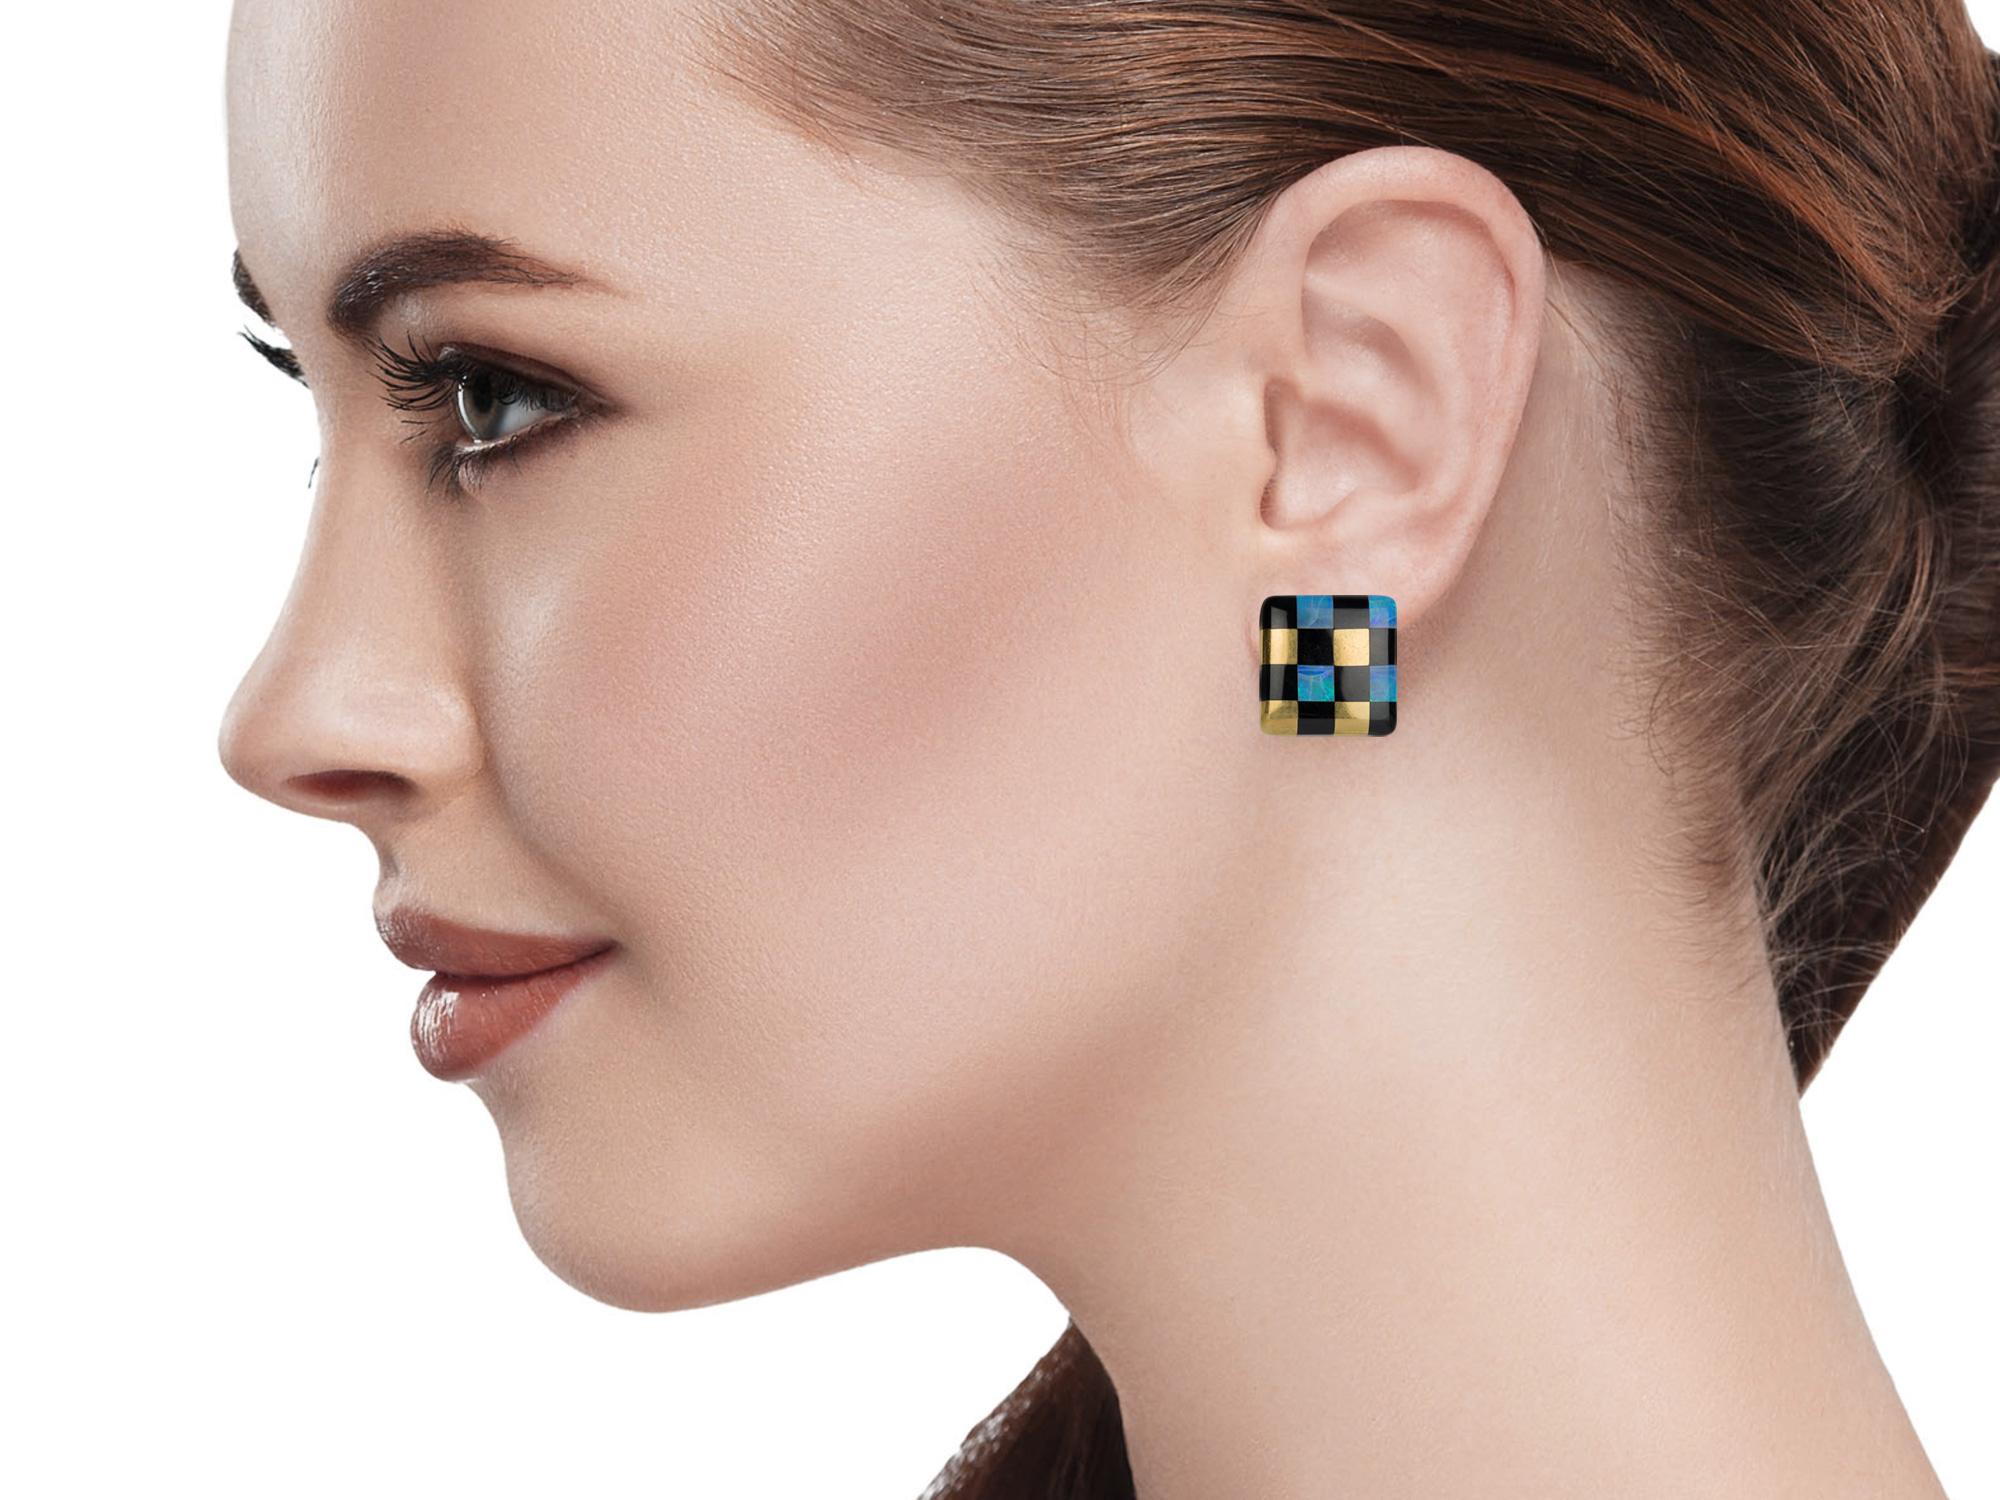 Tiffany & Co. checkered earrings made of Opal and Onyx inlaid in 18k yellow gold in a checkered pattern, designed by Angela Cummings.  Circa 1980's.